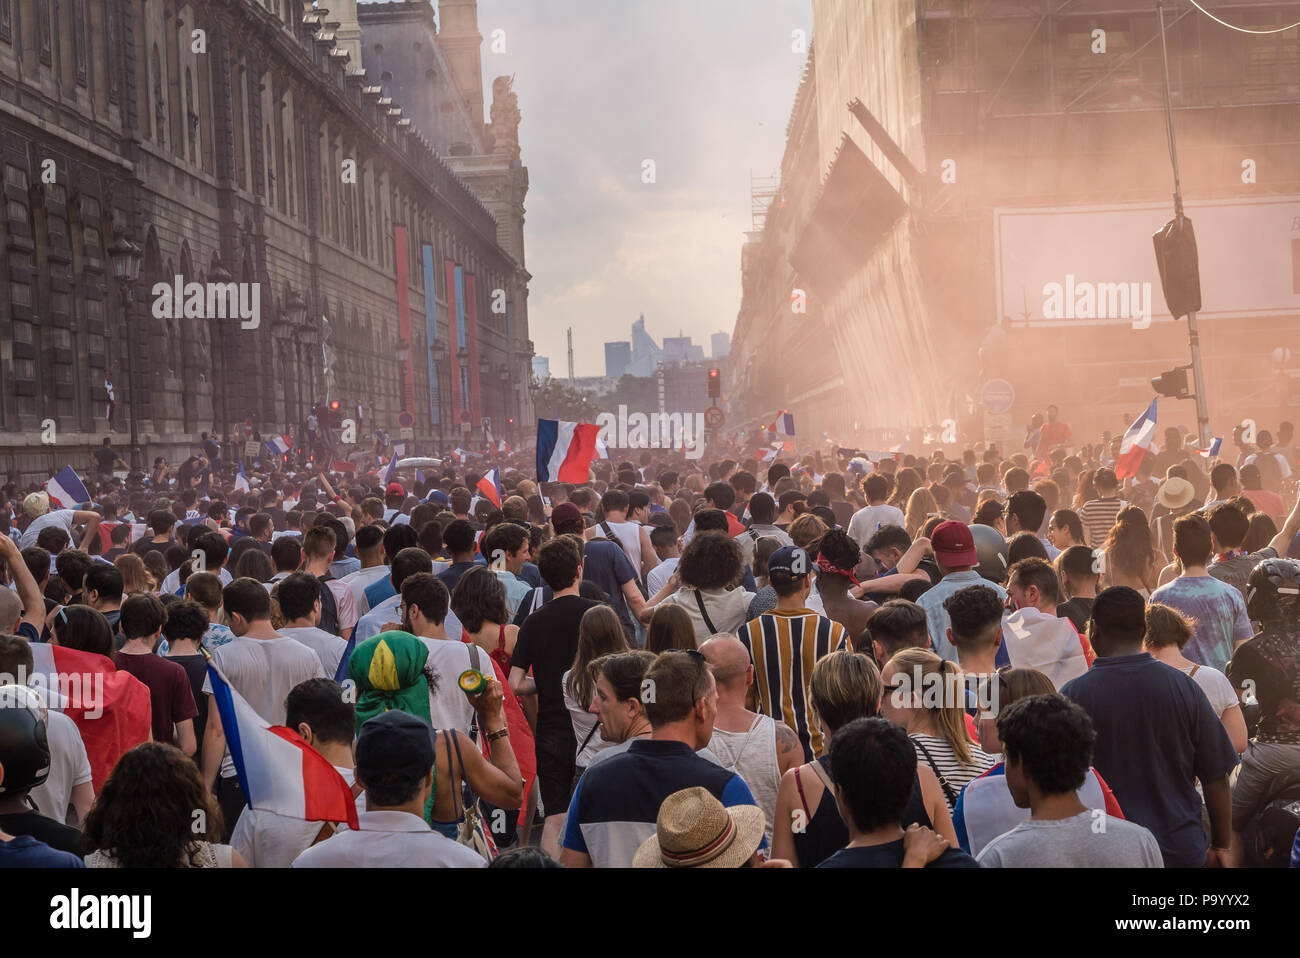 Crowd in Rue de Rivoli in Paris going to the Champs Elysees after the 2018 World Cup Final Game Stock Photo